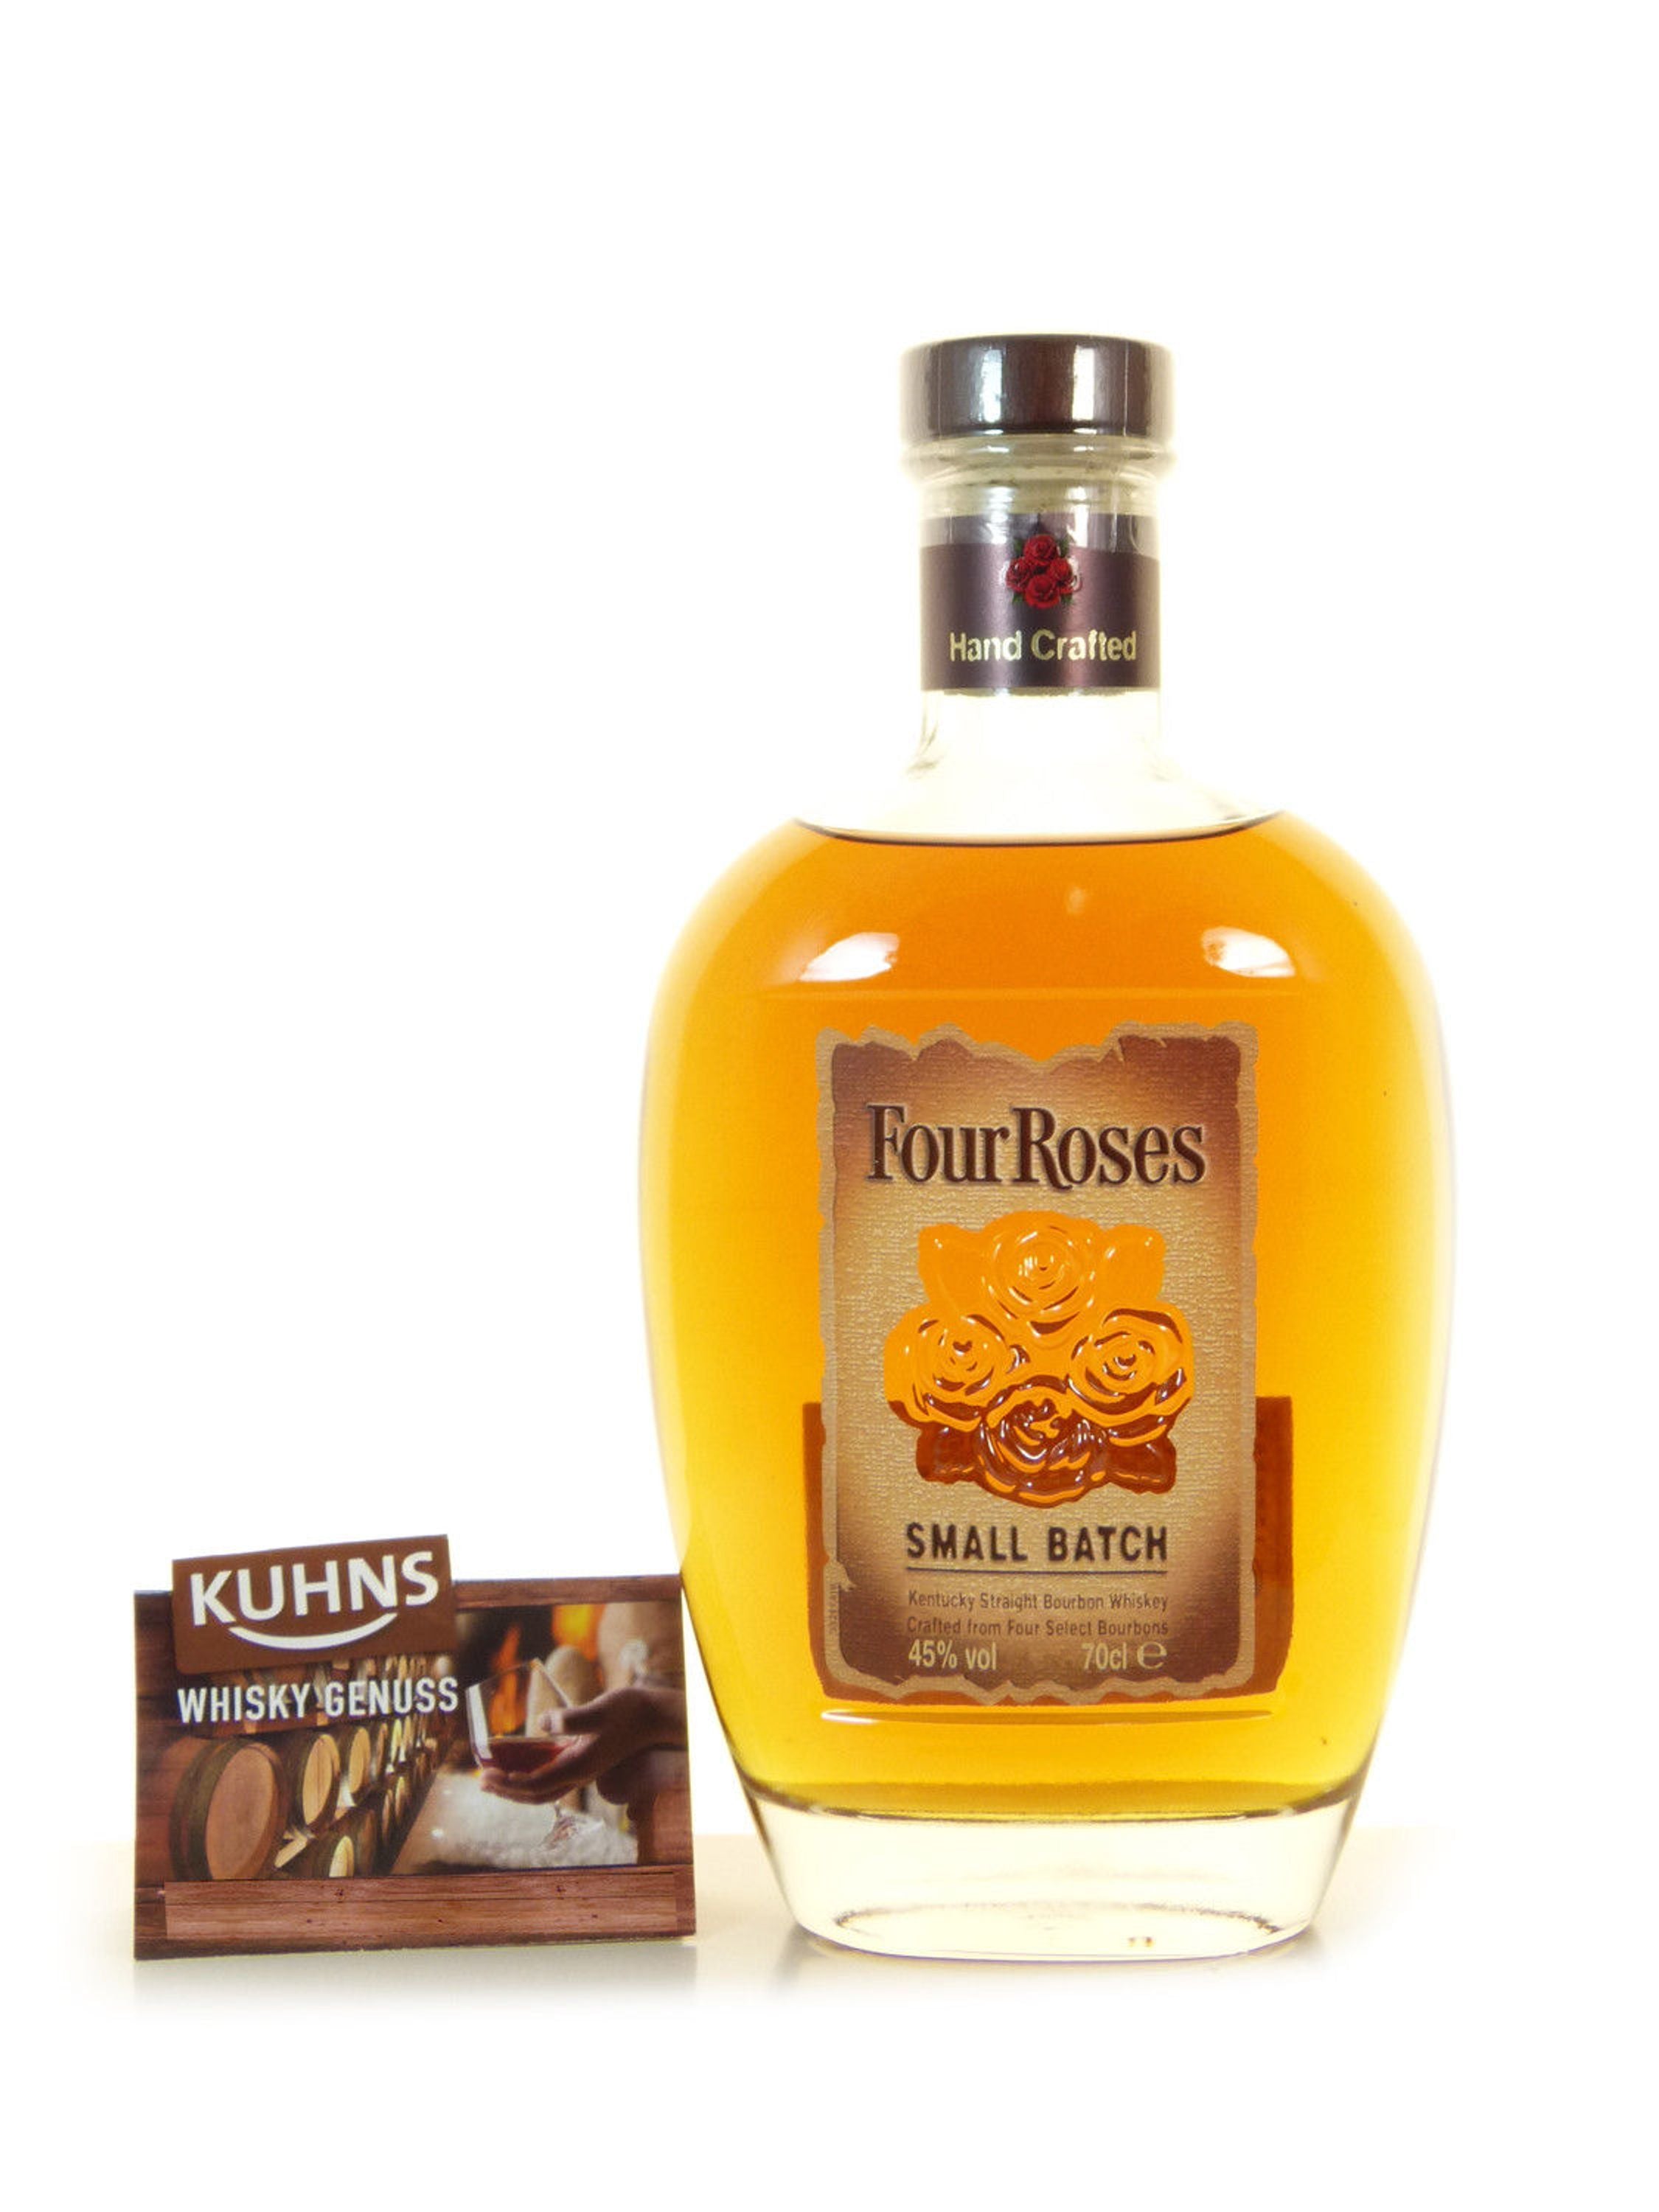 Four Roses Small Batch Kentucky Straight Bourbon 0.7l, alc. 45% by volume